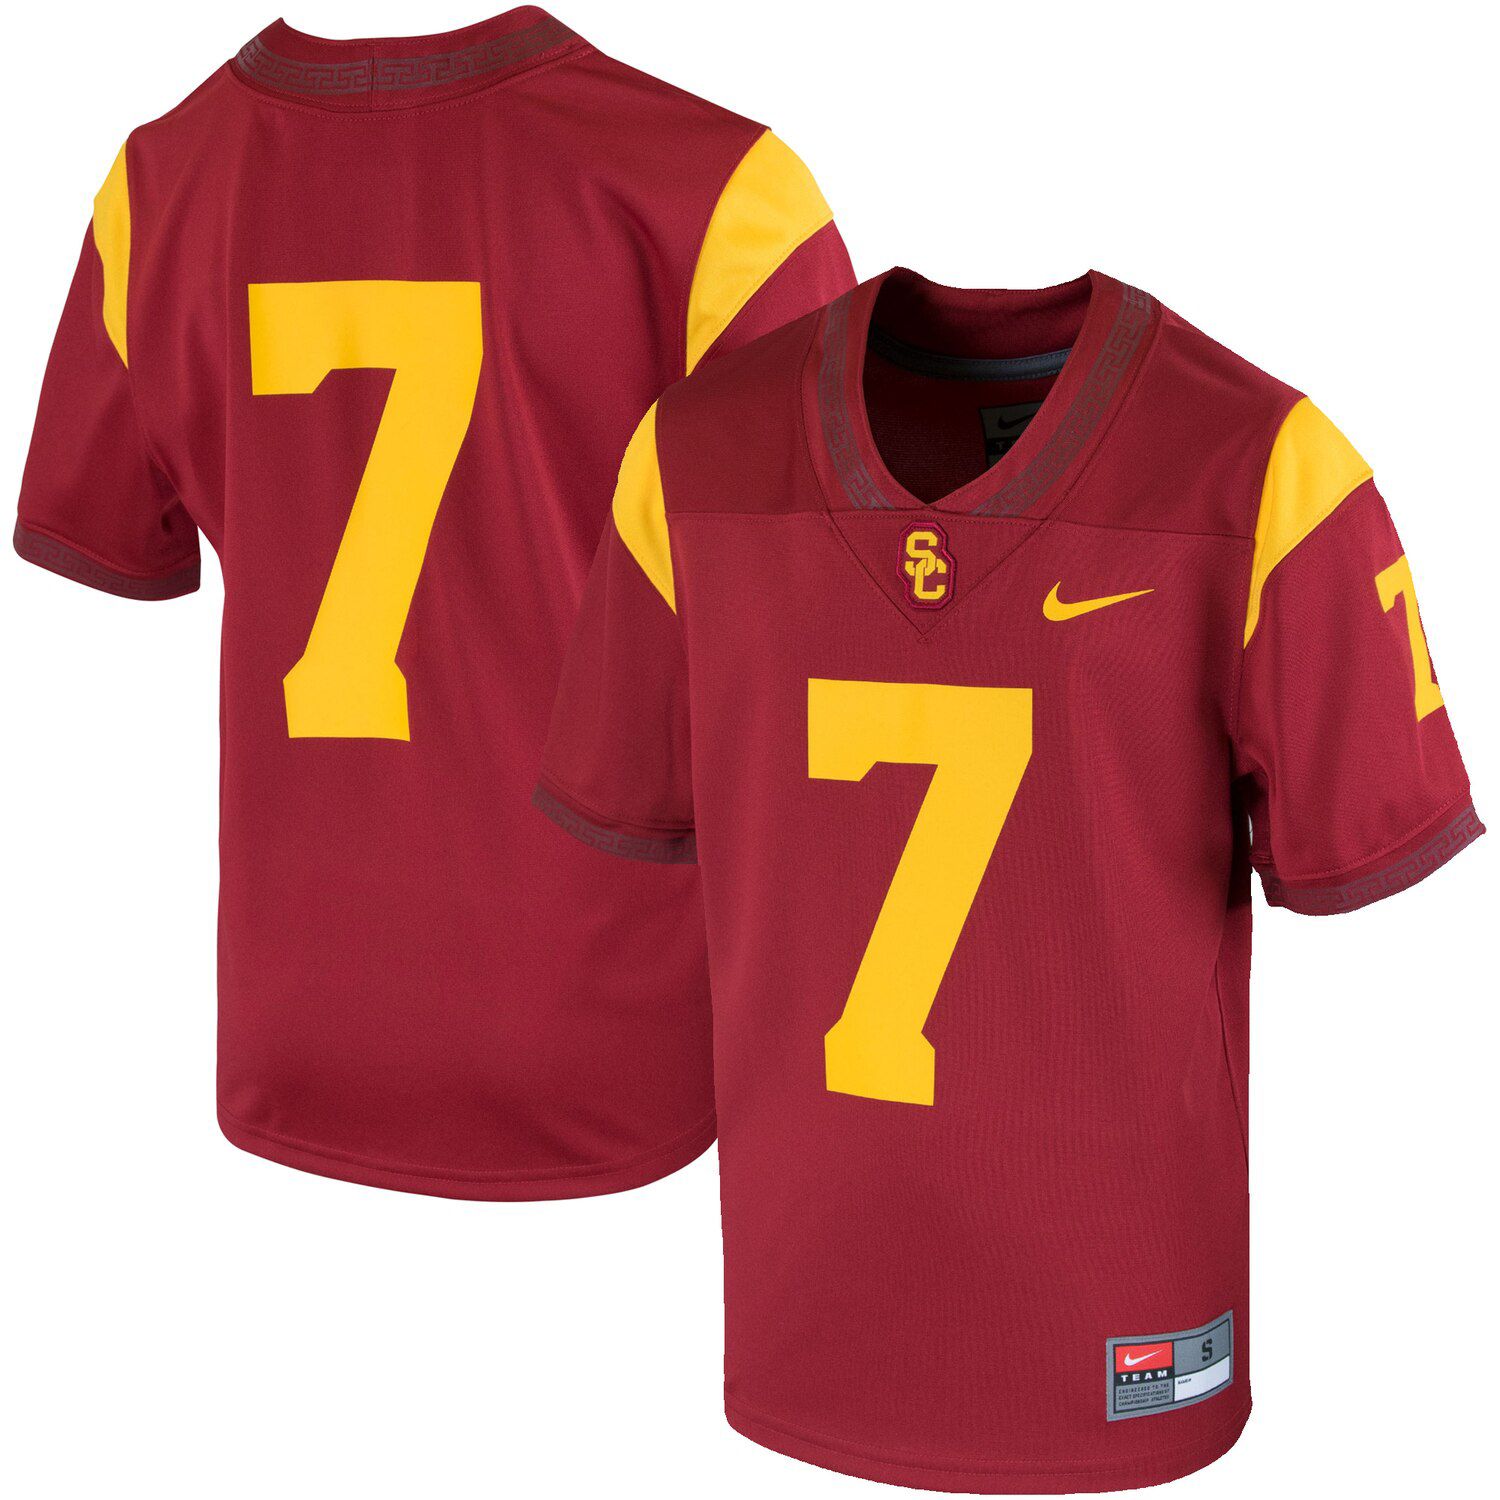 usc youth jersey